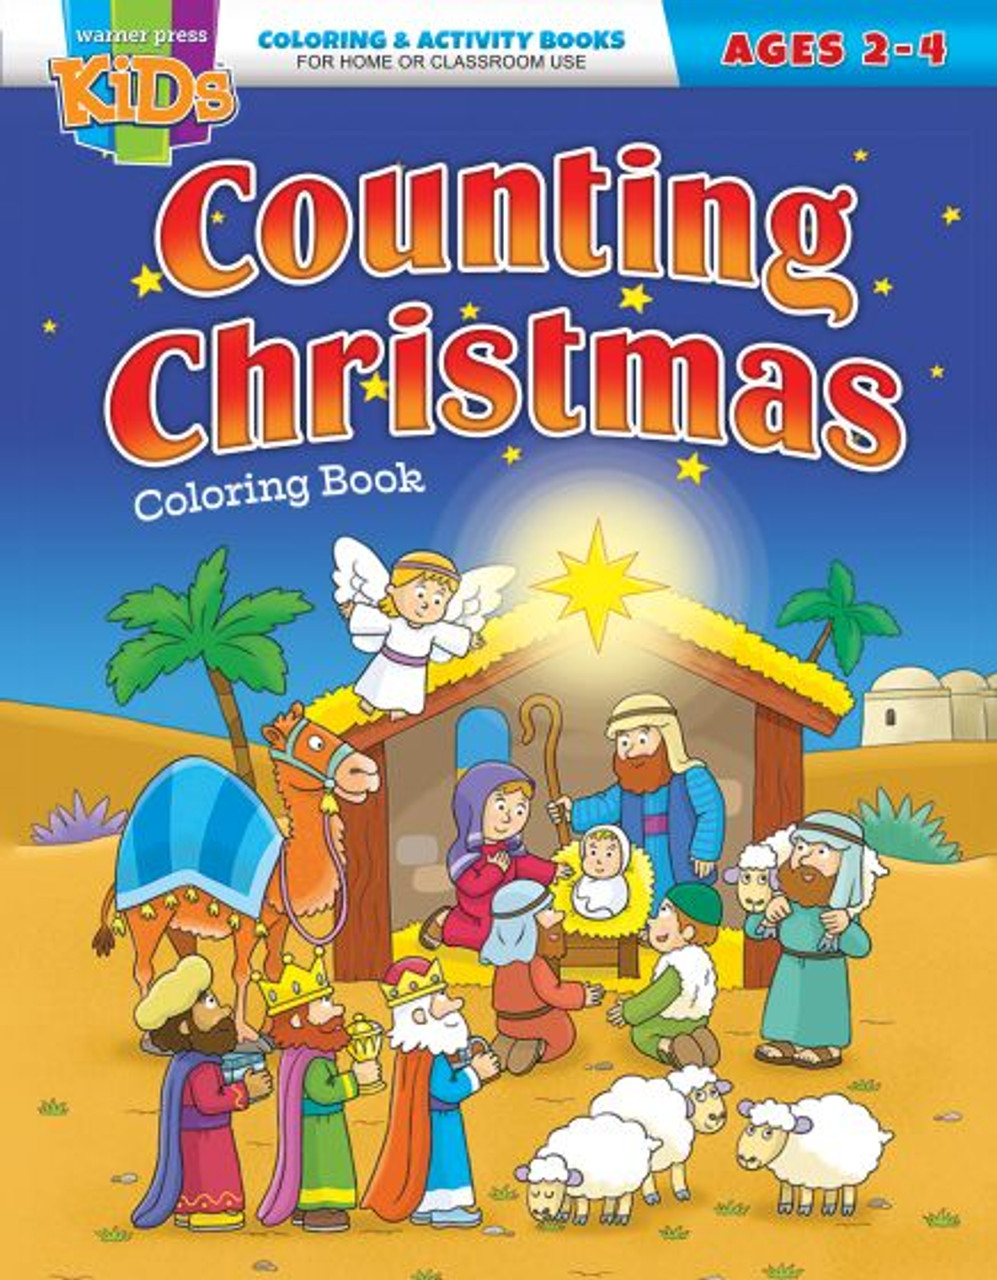 Counting Christmas (Coloring Book 2-4)